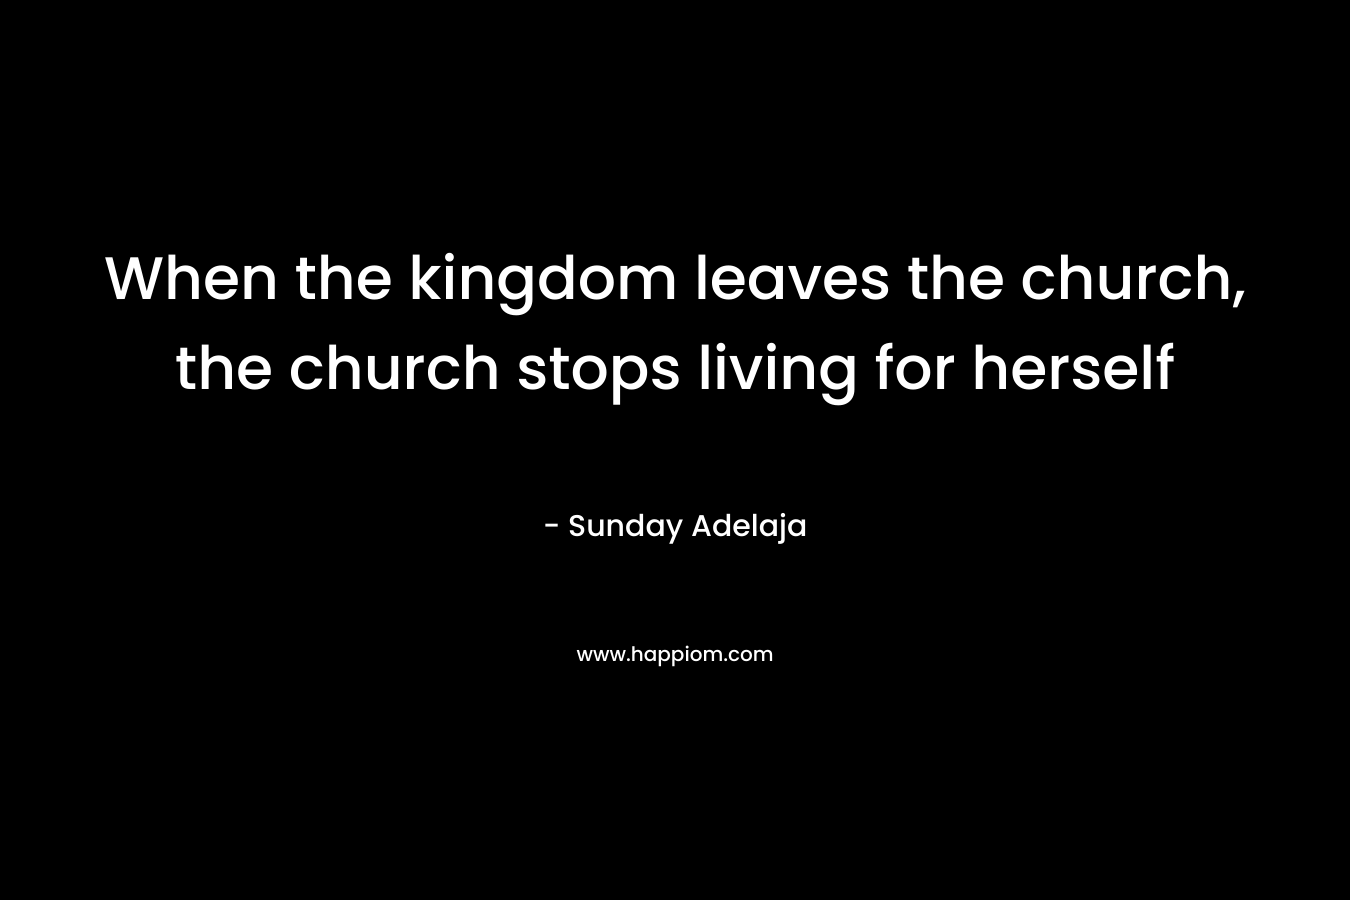 When the kingdom leaves the church, the church stops living for herself